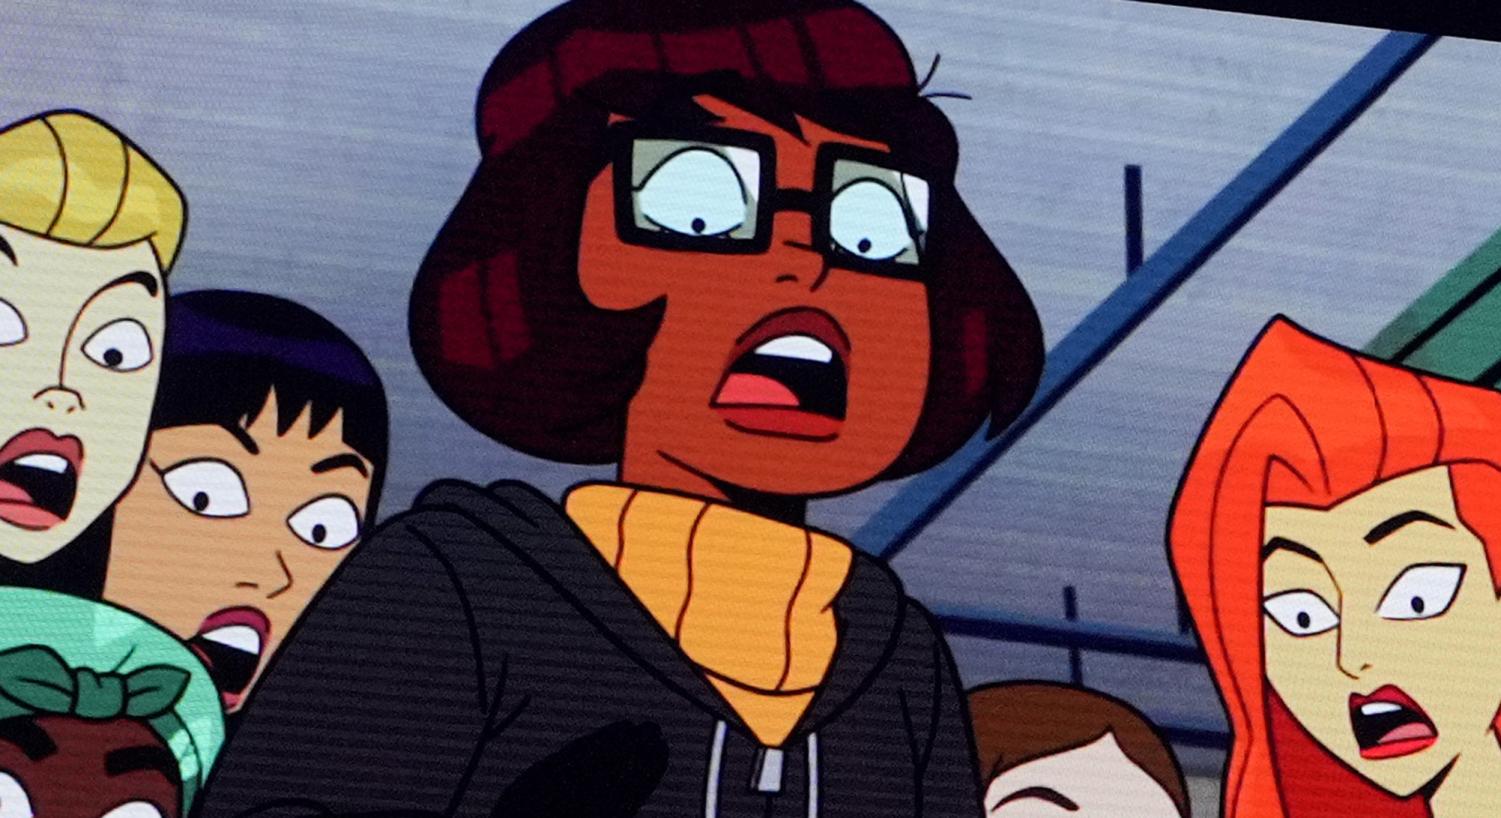 Velma' Becomes Lowest Rated Animated Series On IMDb Ever